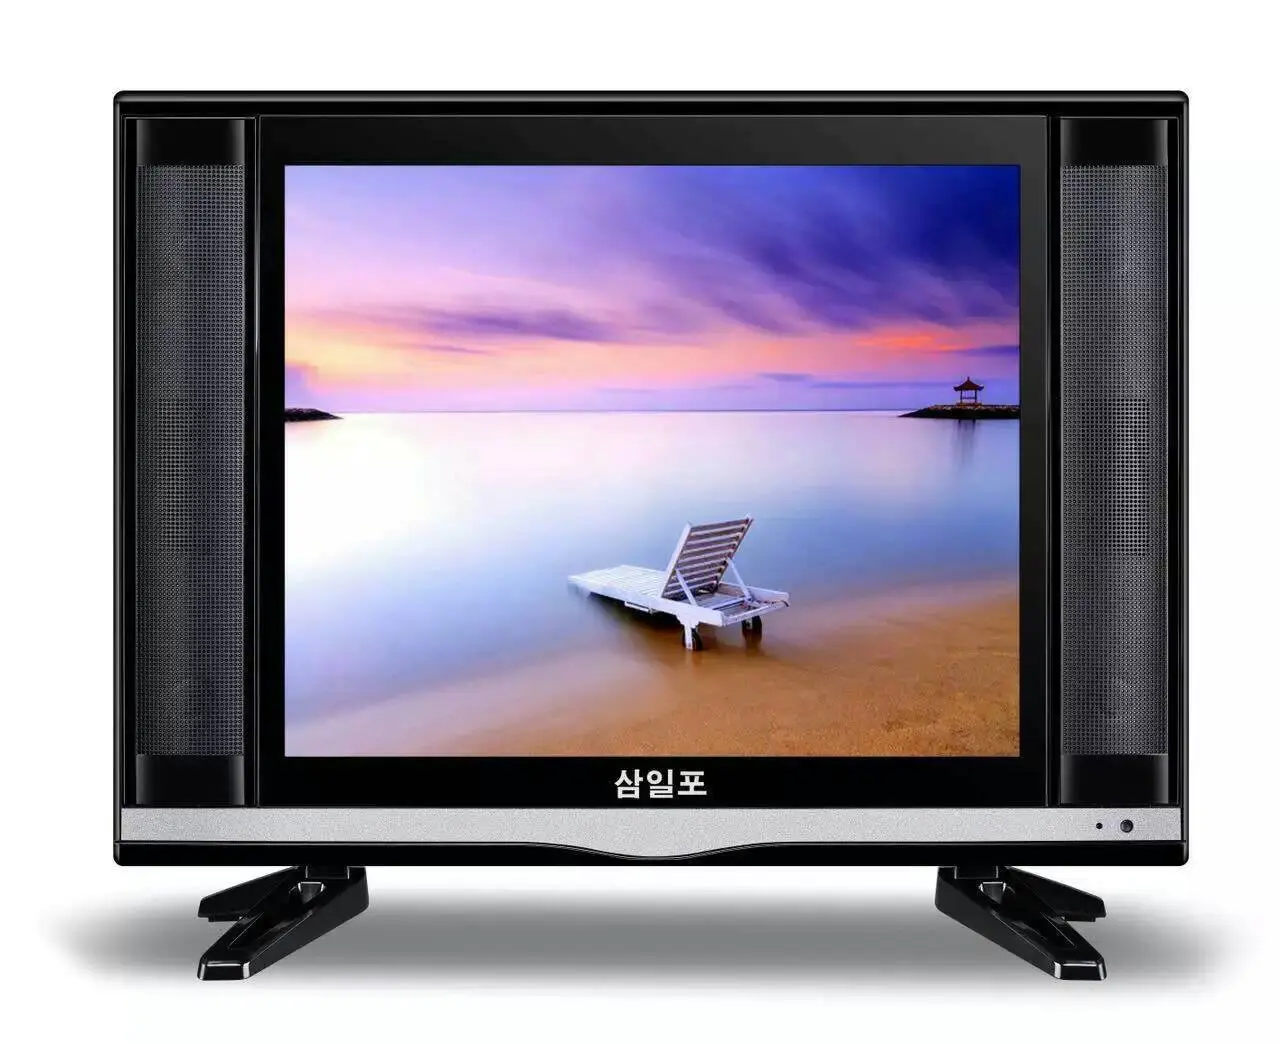 Xinyao LCD 17 inch tv price new style for lcd screen